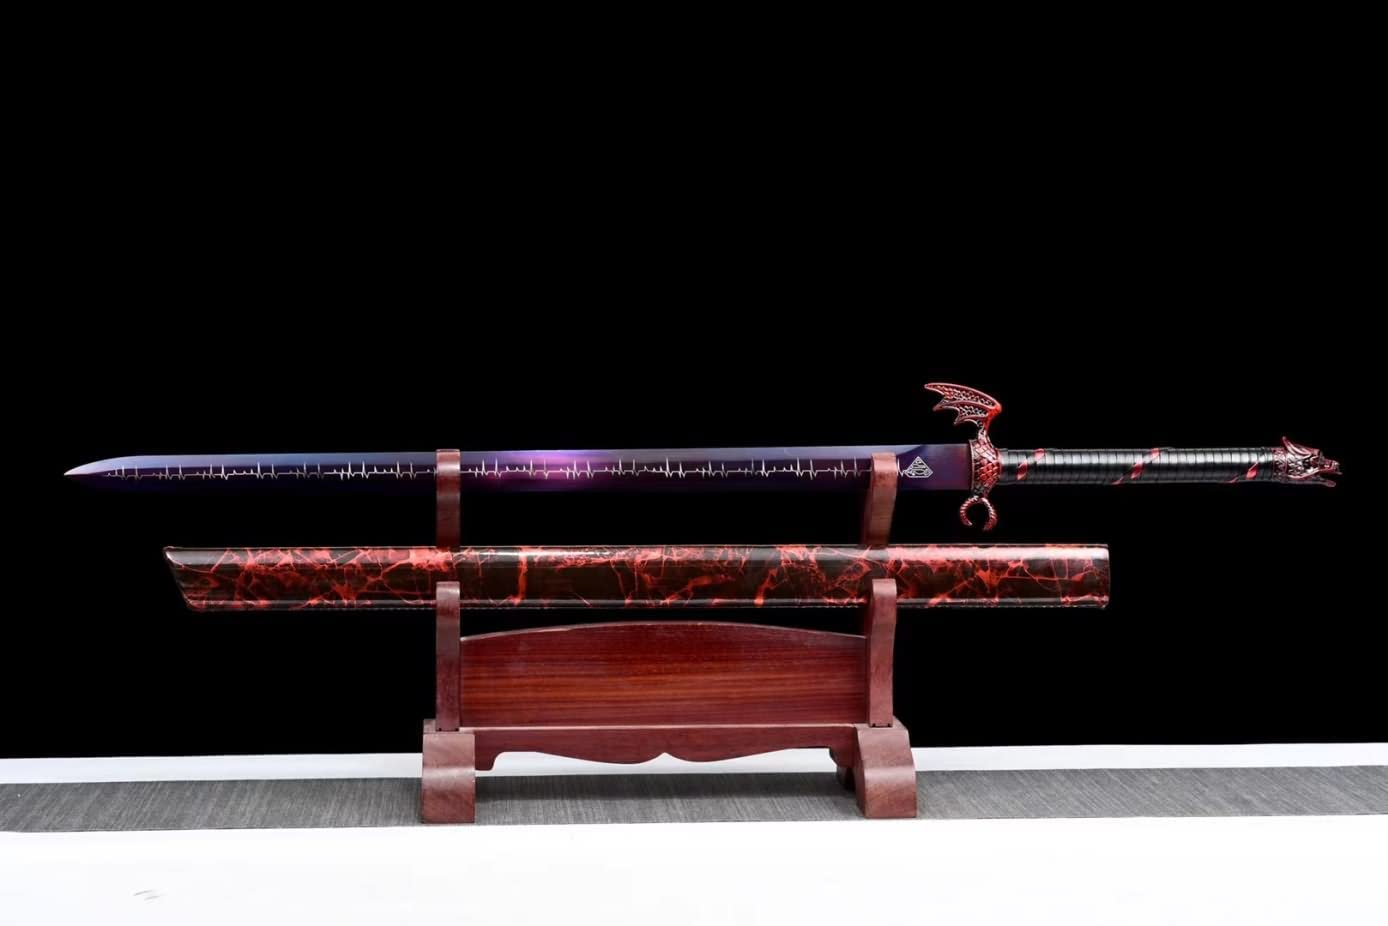 Chinese sword,Shura Knife jian,Forged High Carbon Steel Purple Blades,Alloy Fittings